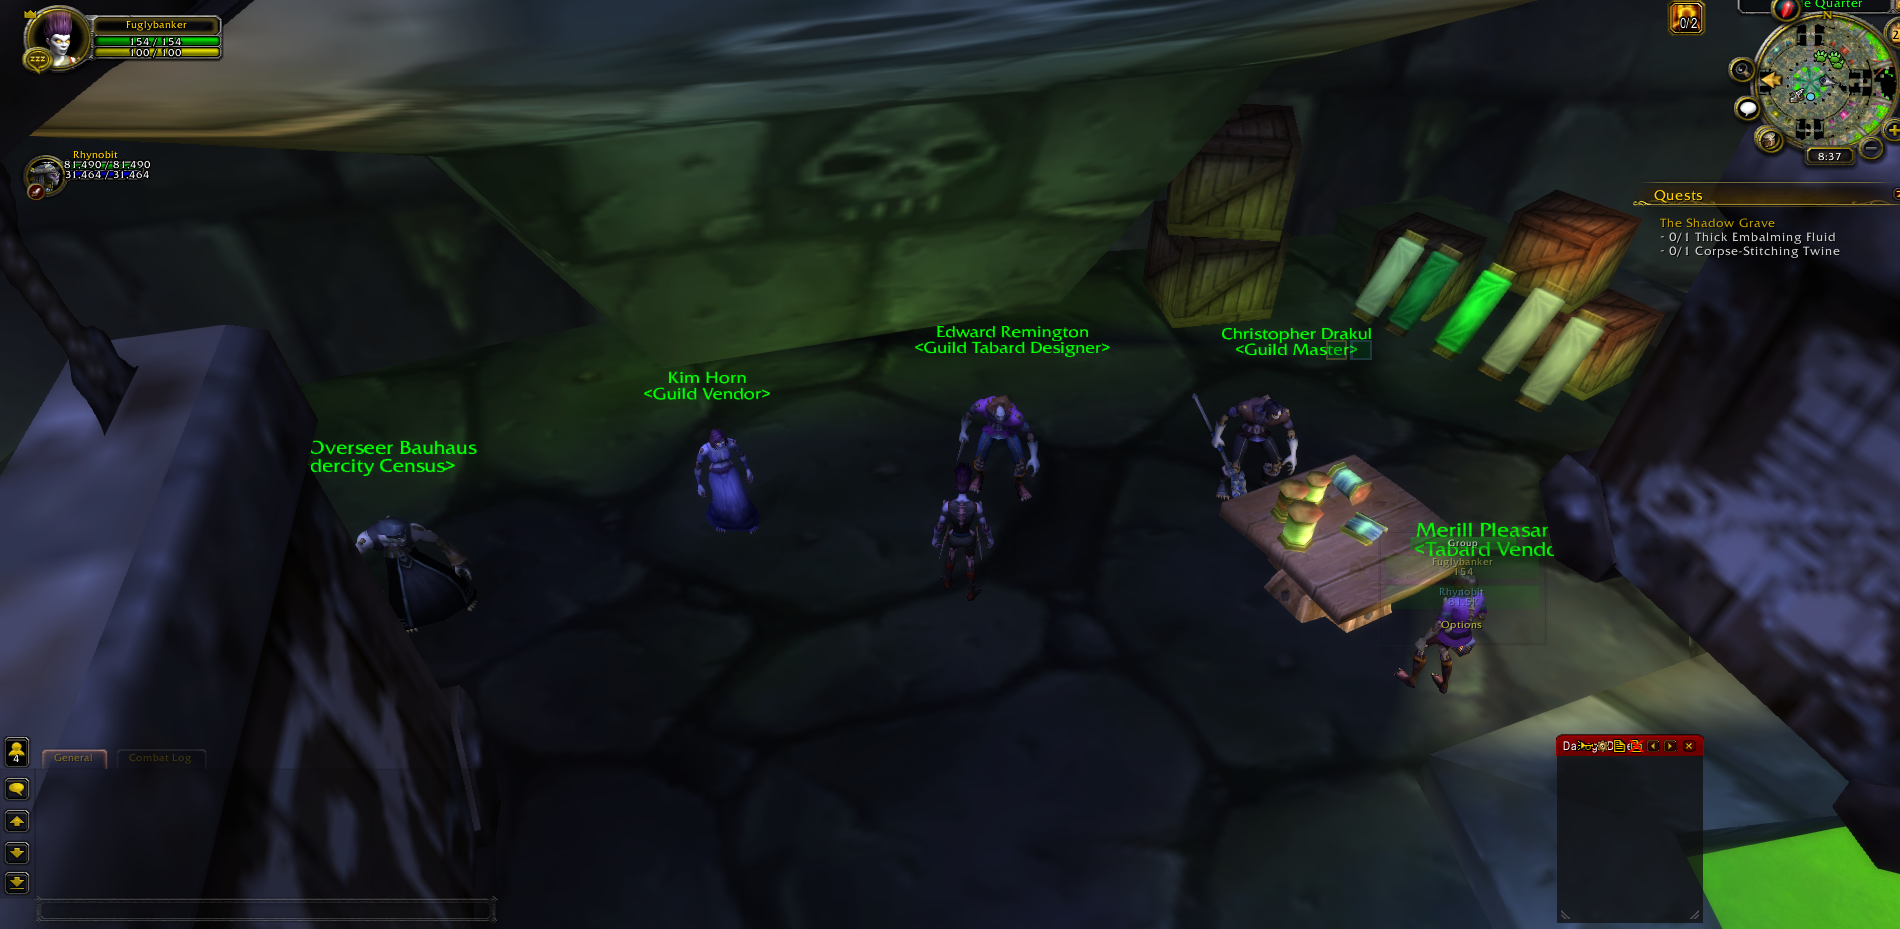 Guild vendors in Undercity, a Horde town. Image by Jana Allmand-Zeman.